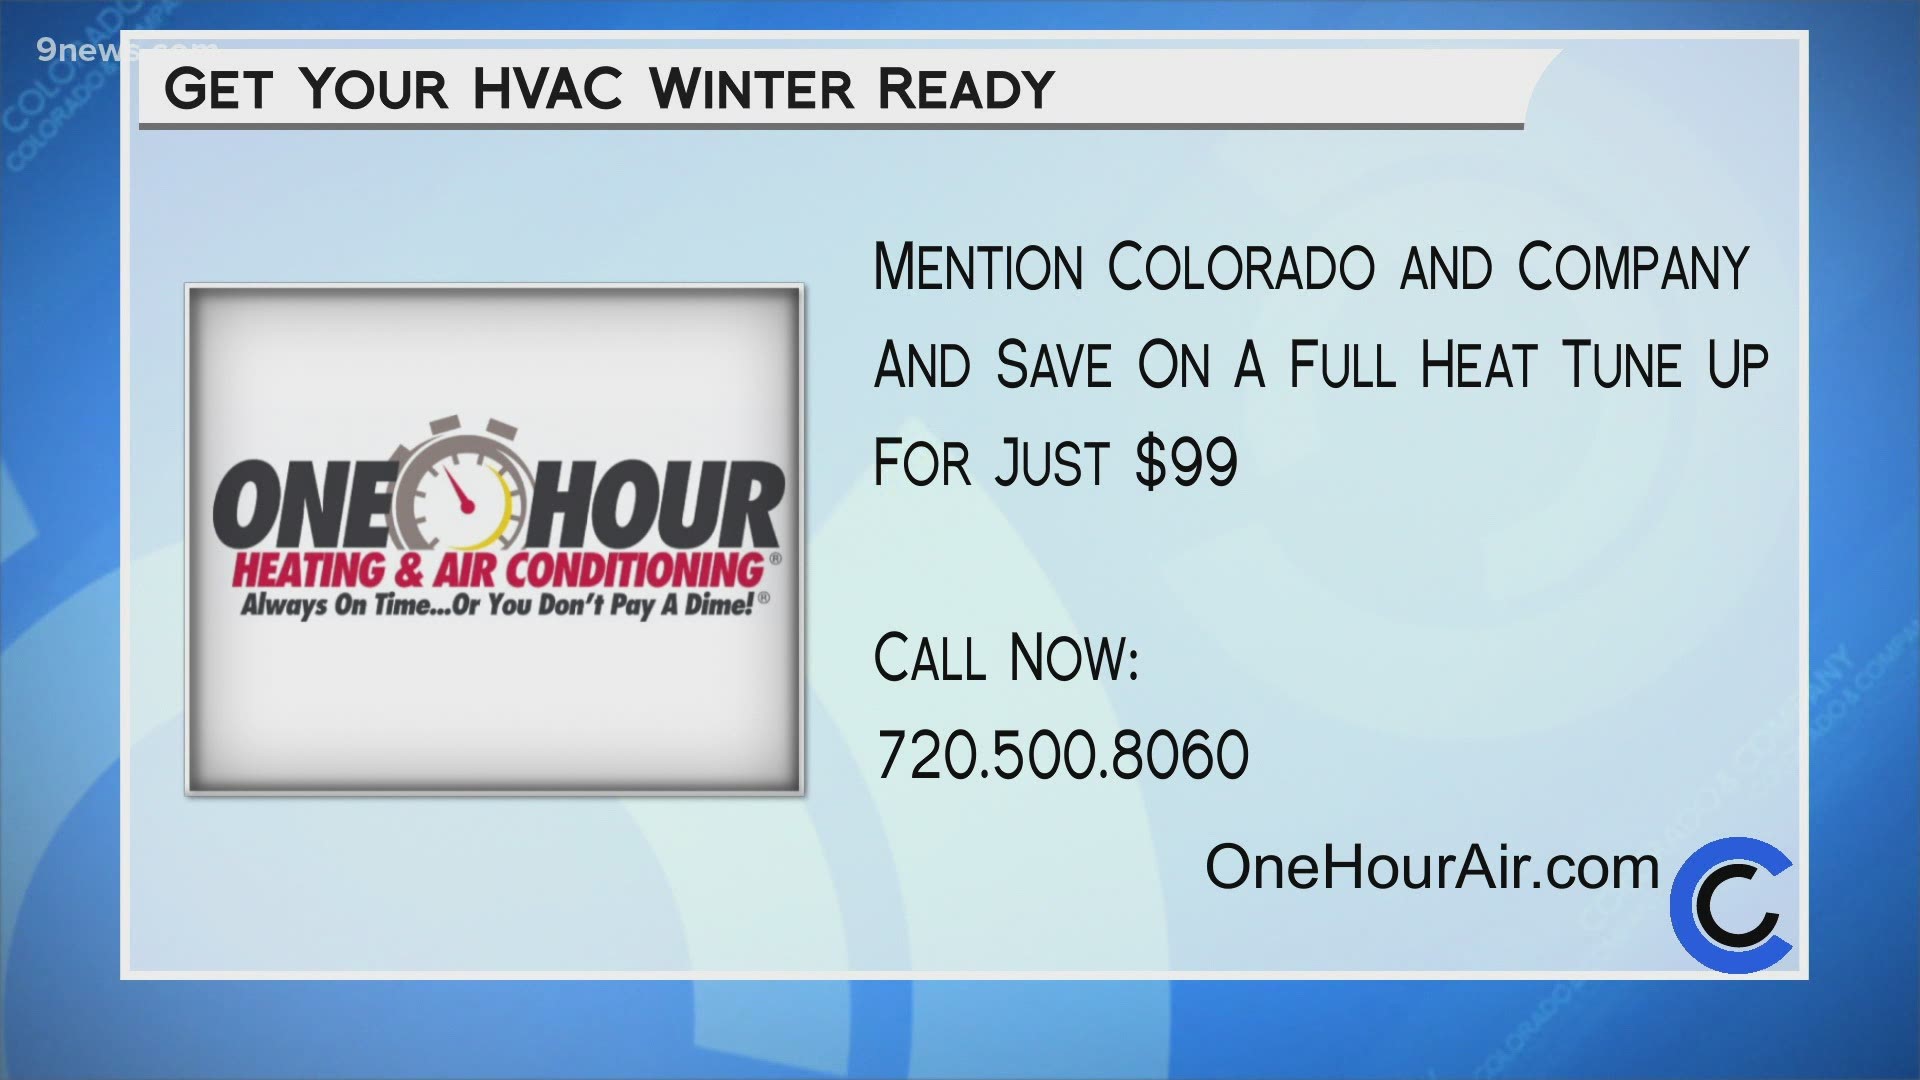 COCO viewers can save $99 by booking your tune up now! Call 720.500.8060 or visit OneHourAir.com to learn more and get started.